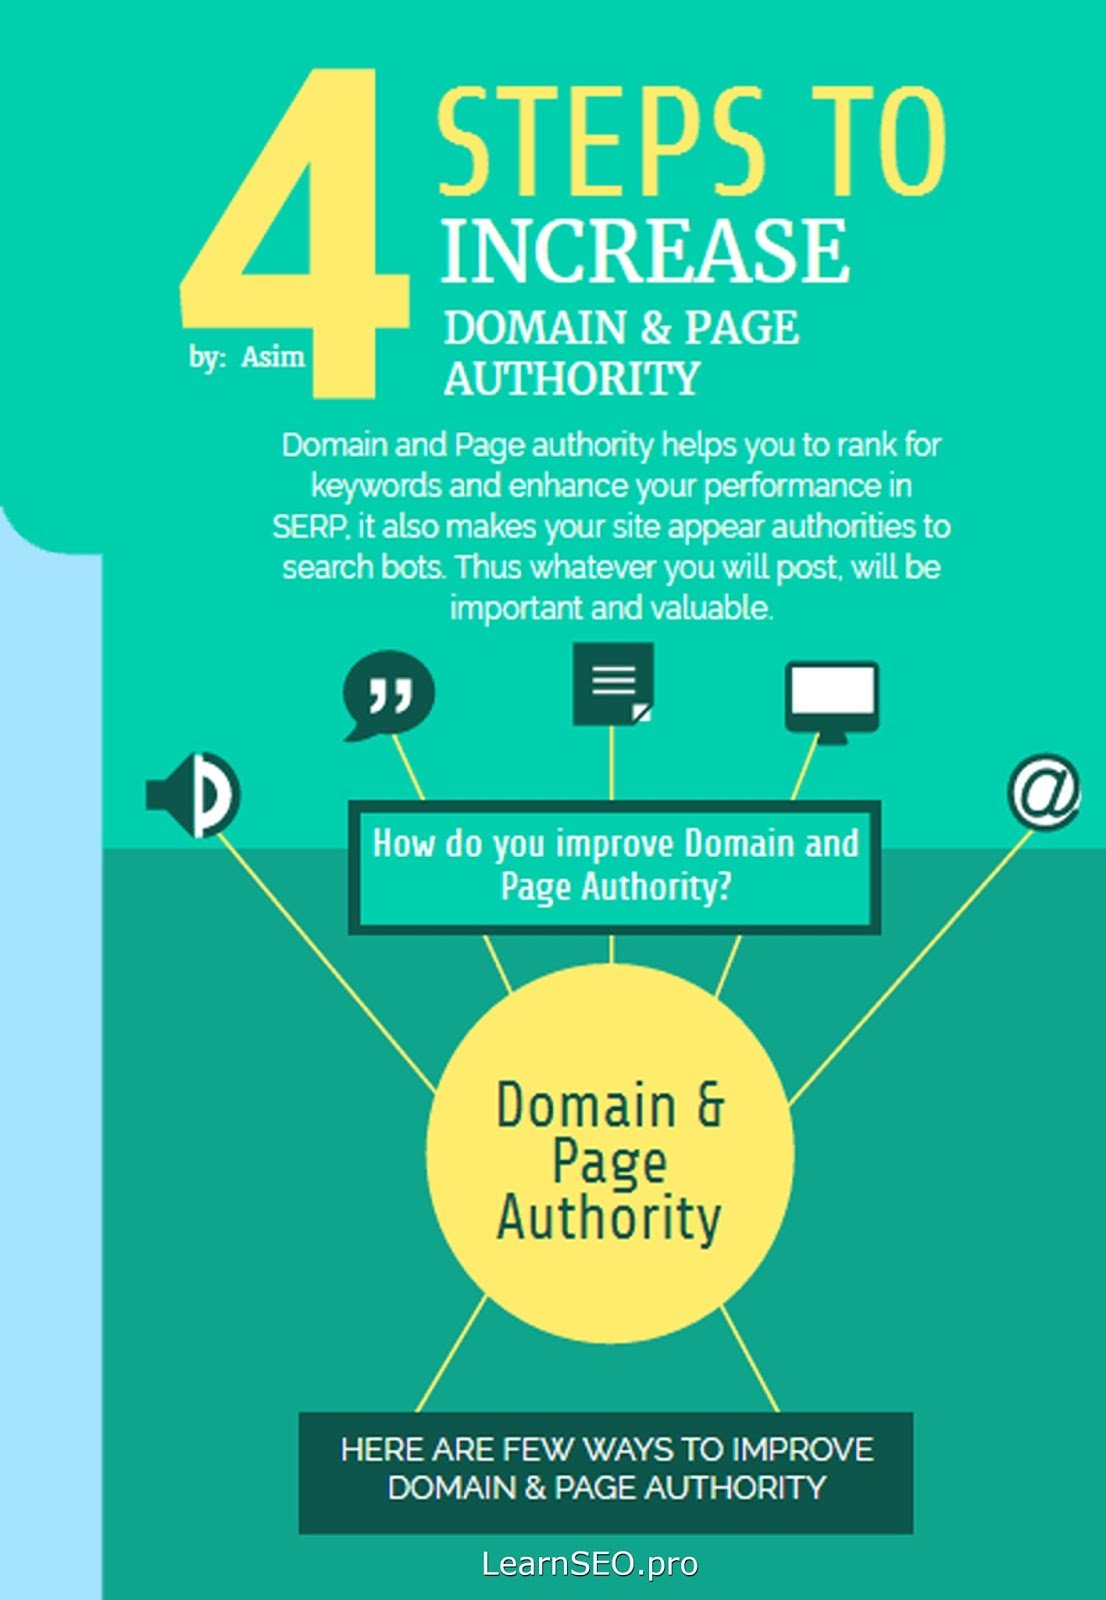 How to Improve Domain and Page Authority?